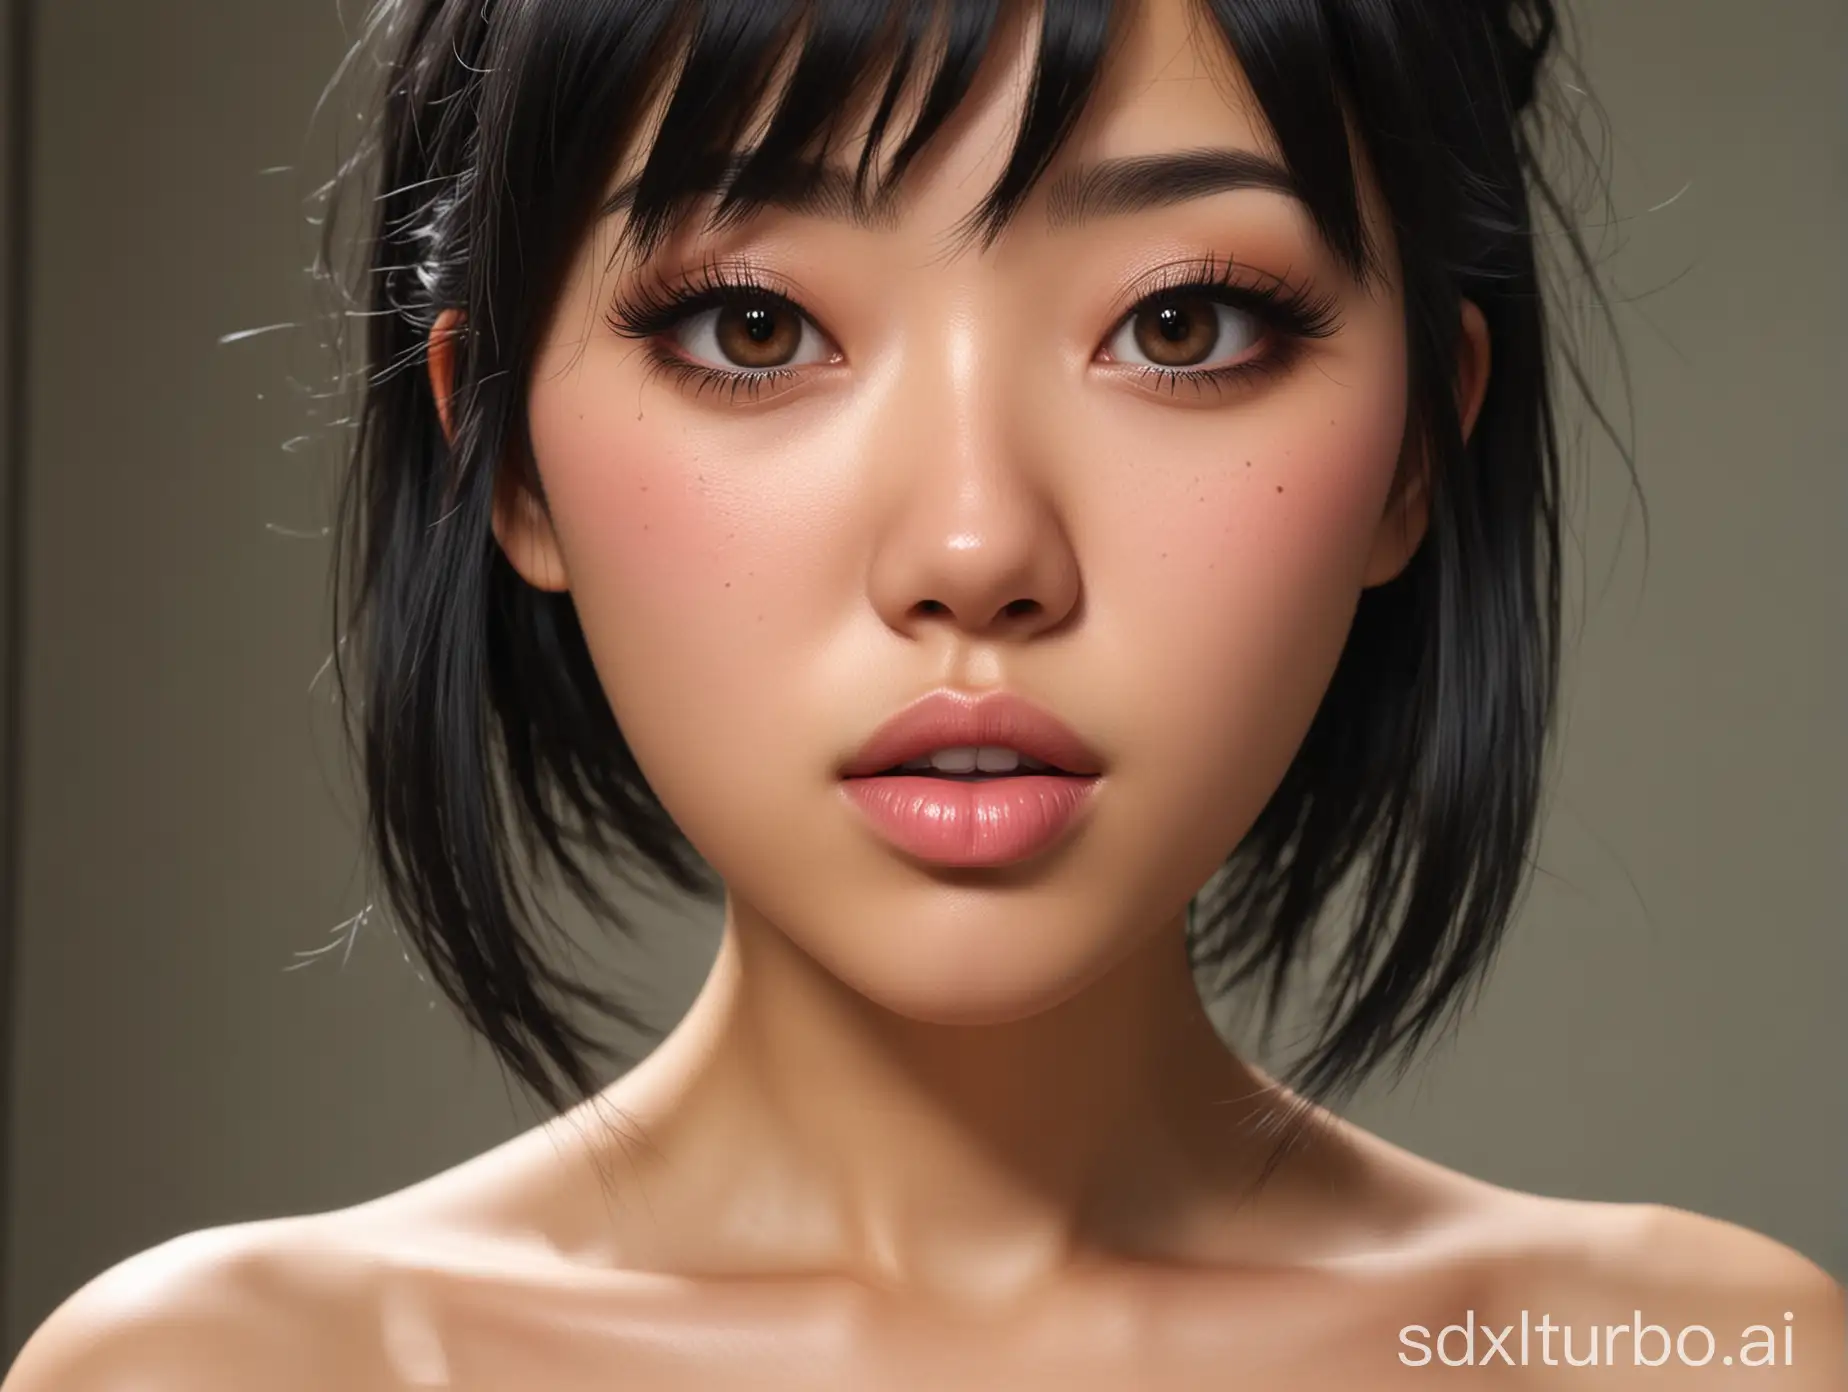 first pov towards mirror , black hair female, realistic, asian features, extreme skin and texture detail, cute hairstyle, huge lips, female